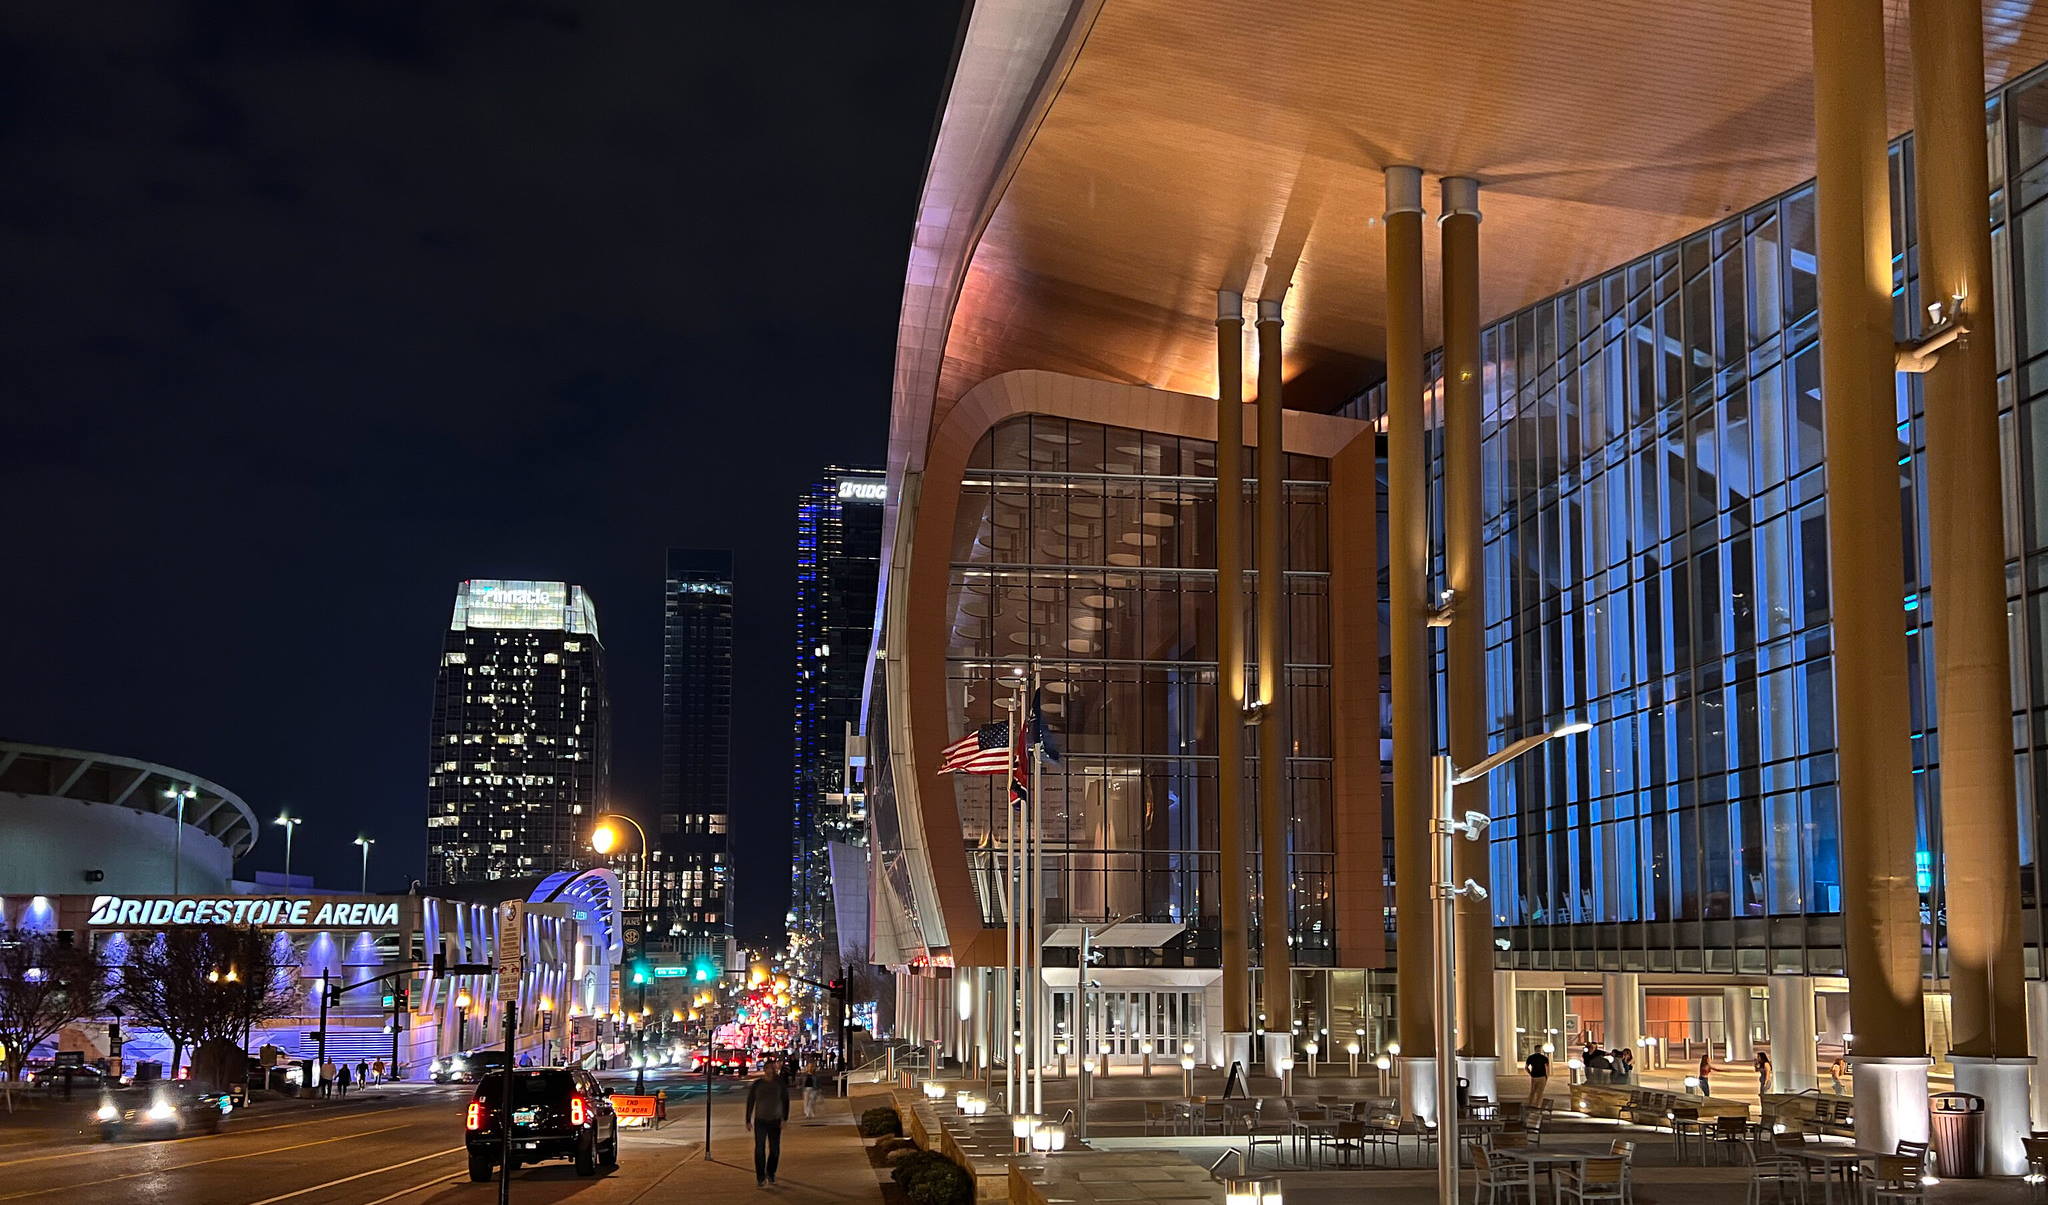 Photos of Music City Center in Nashville, Tennessee